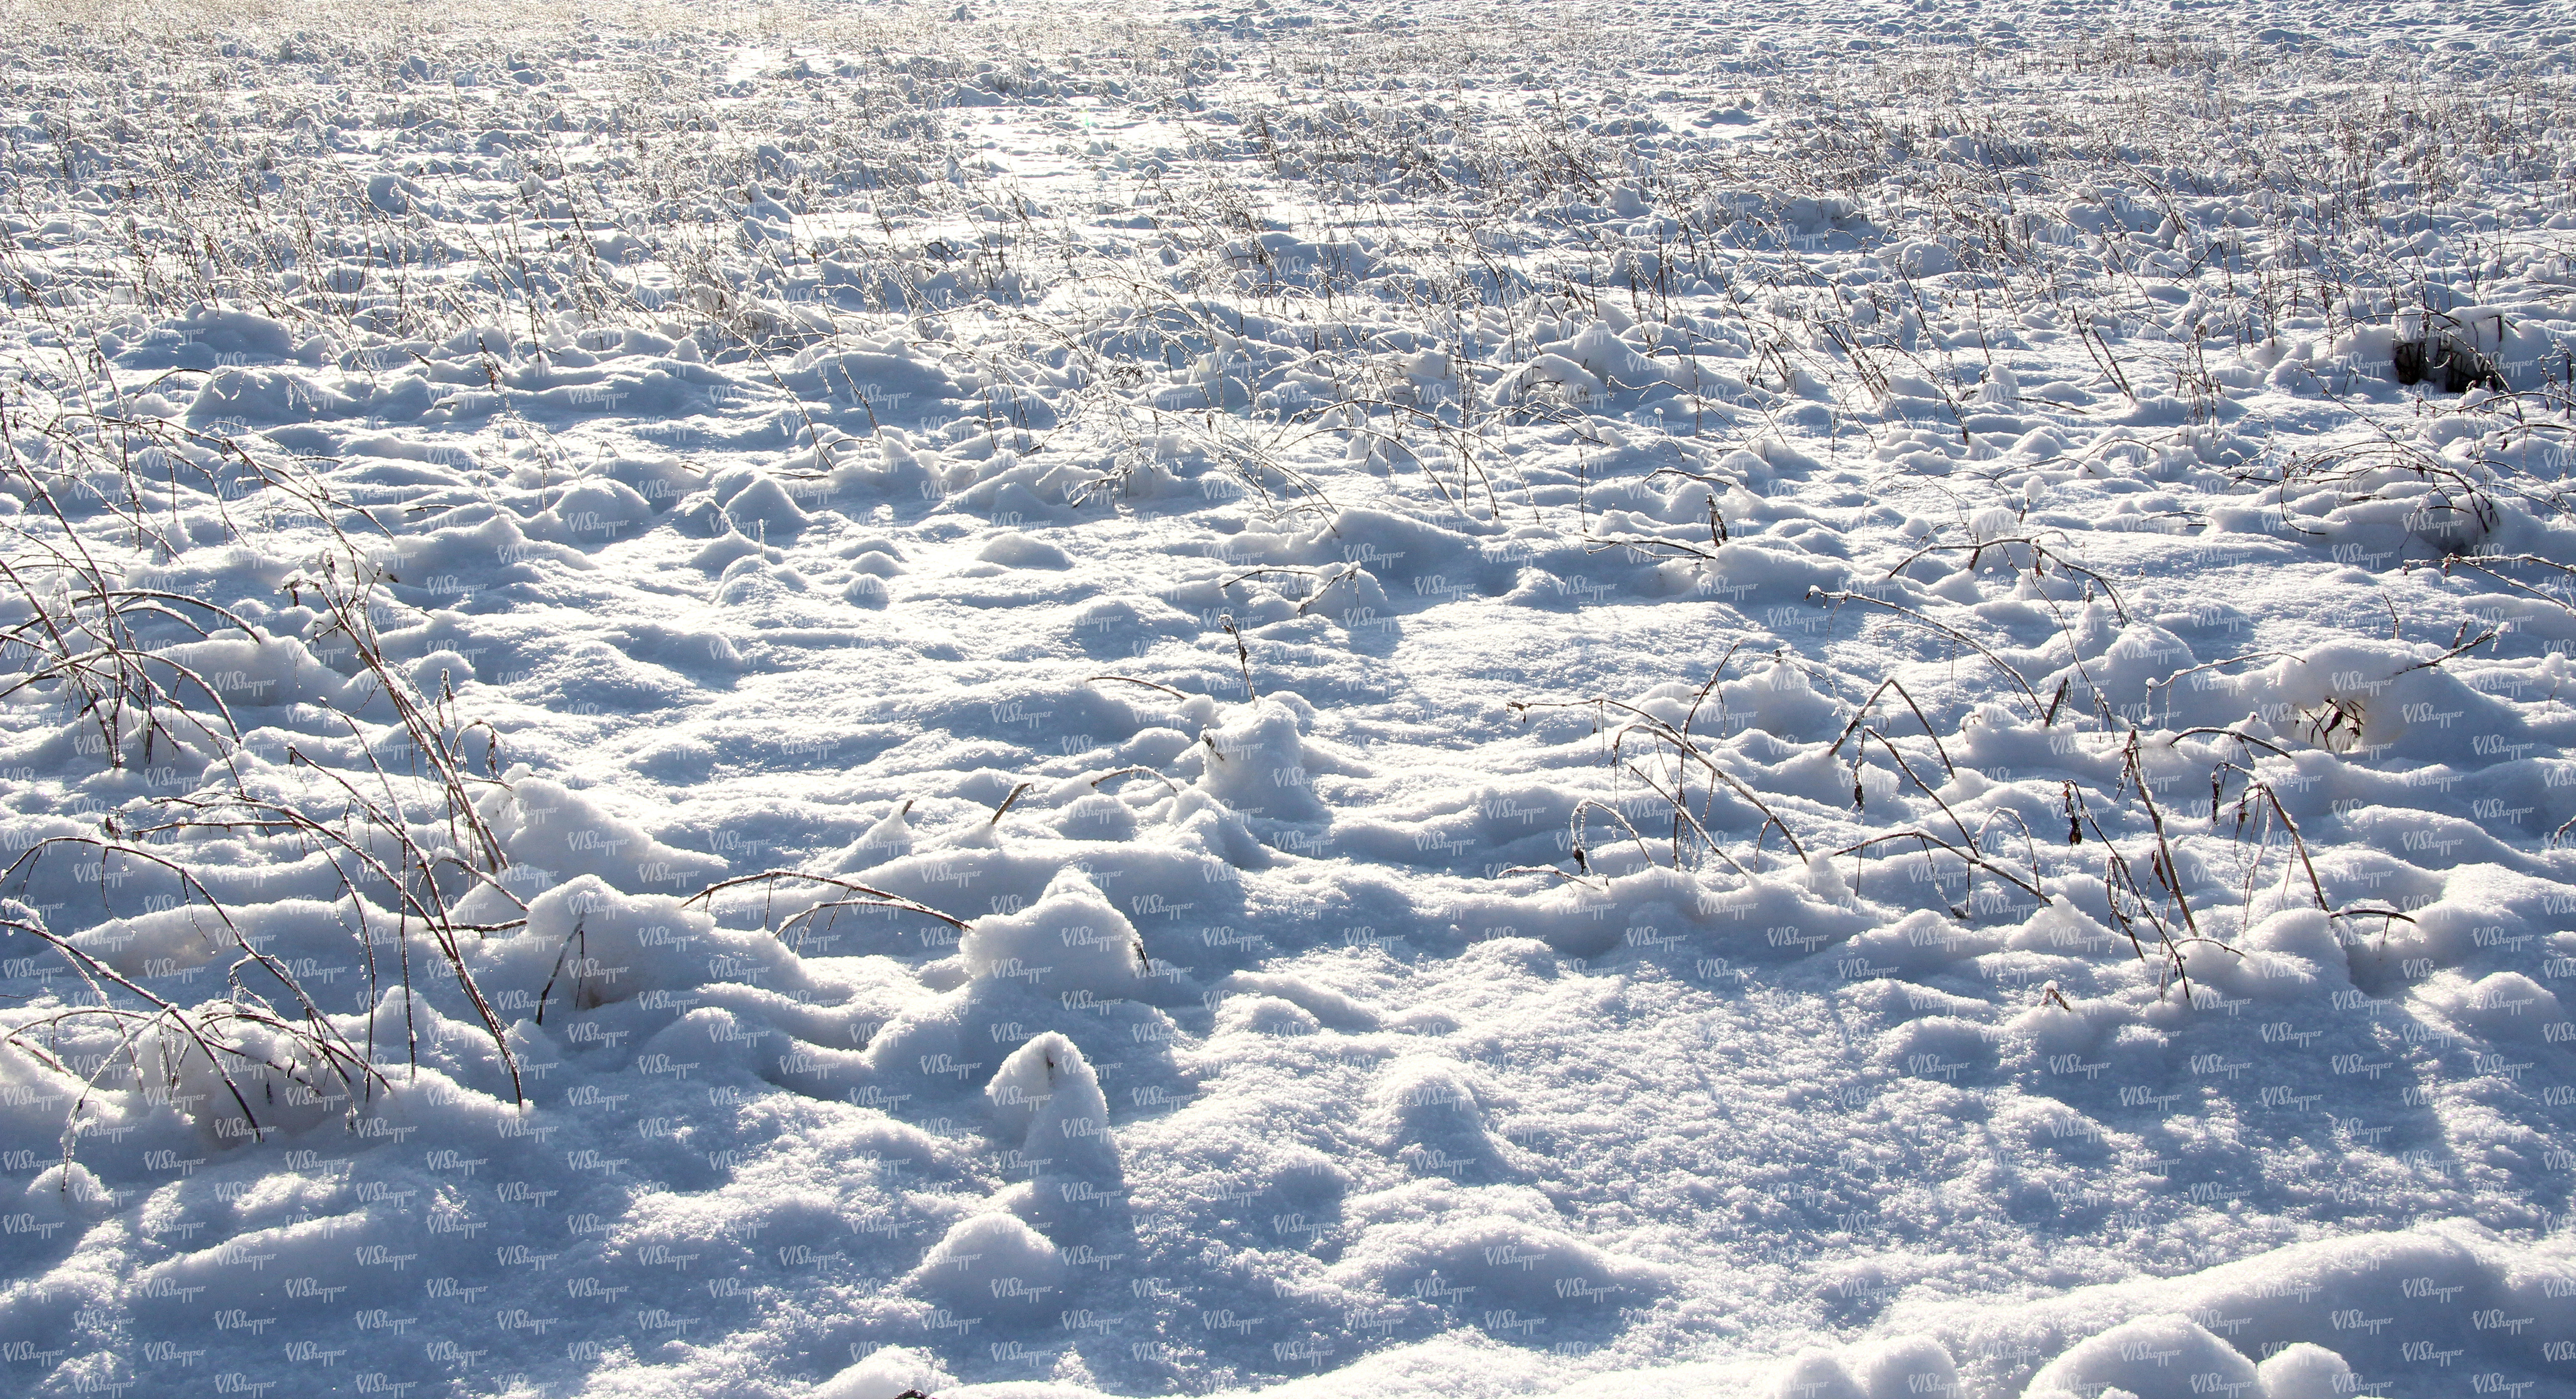 bumpy snow-covered ground with some plants - ground textures - VIShopper